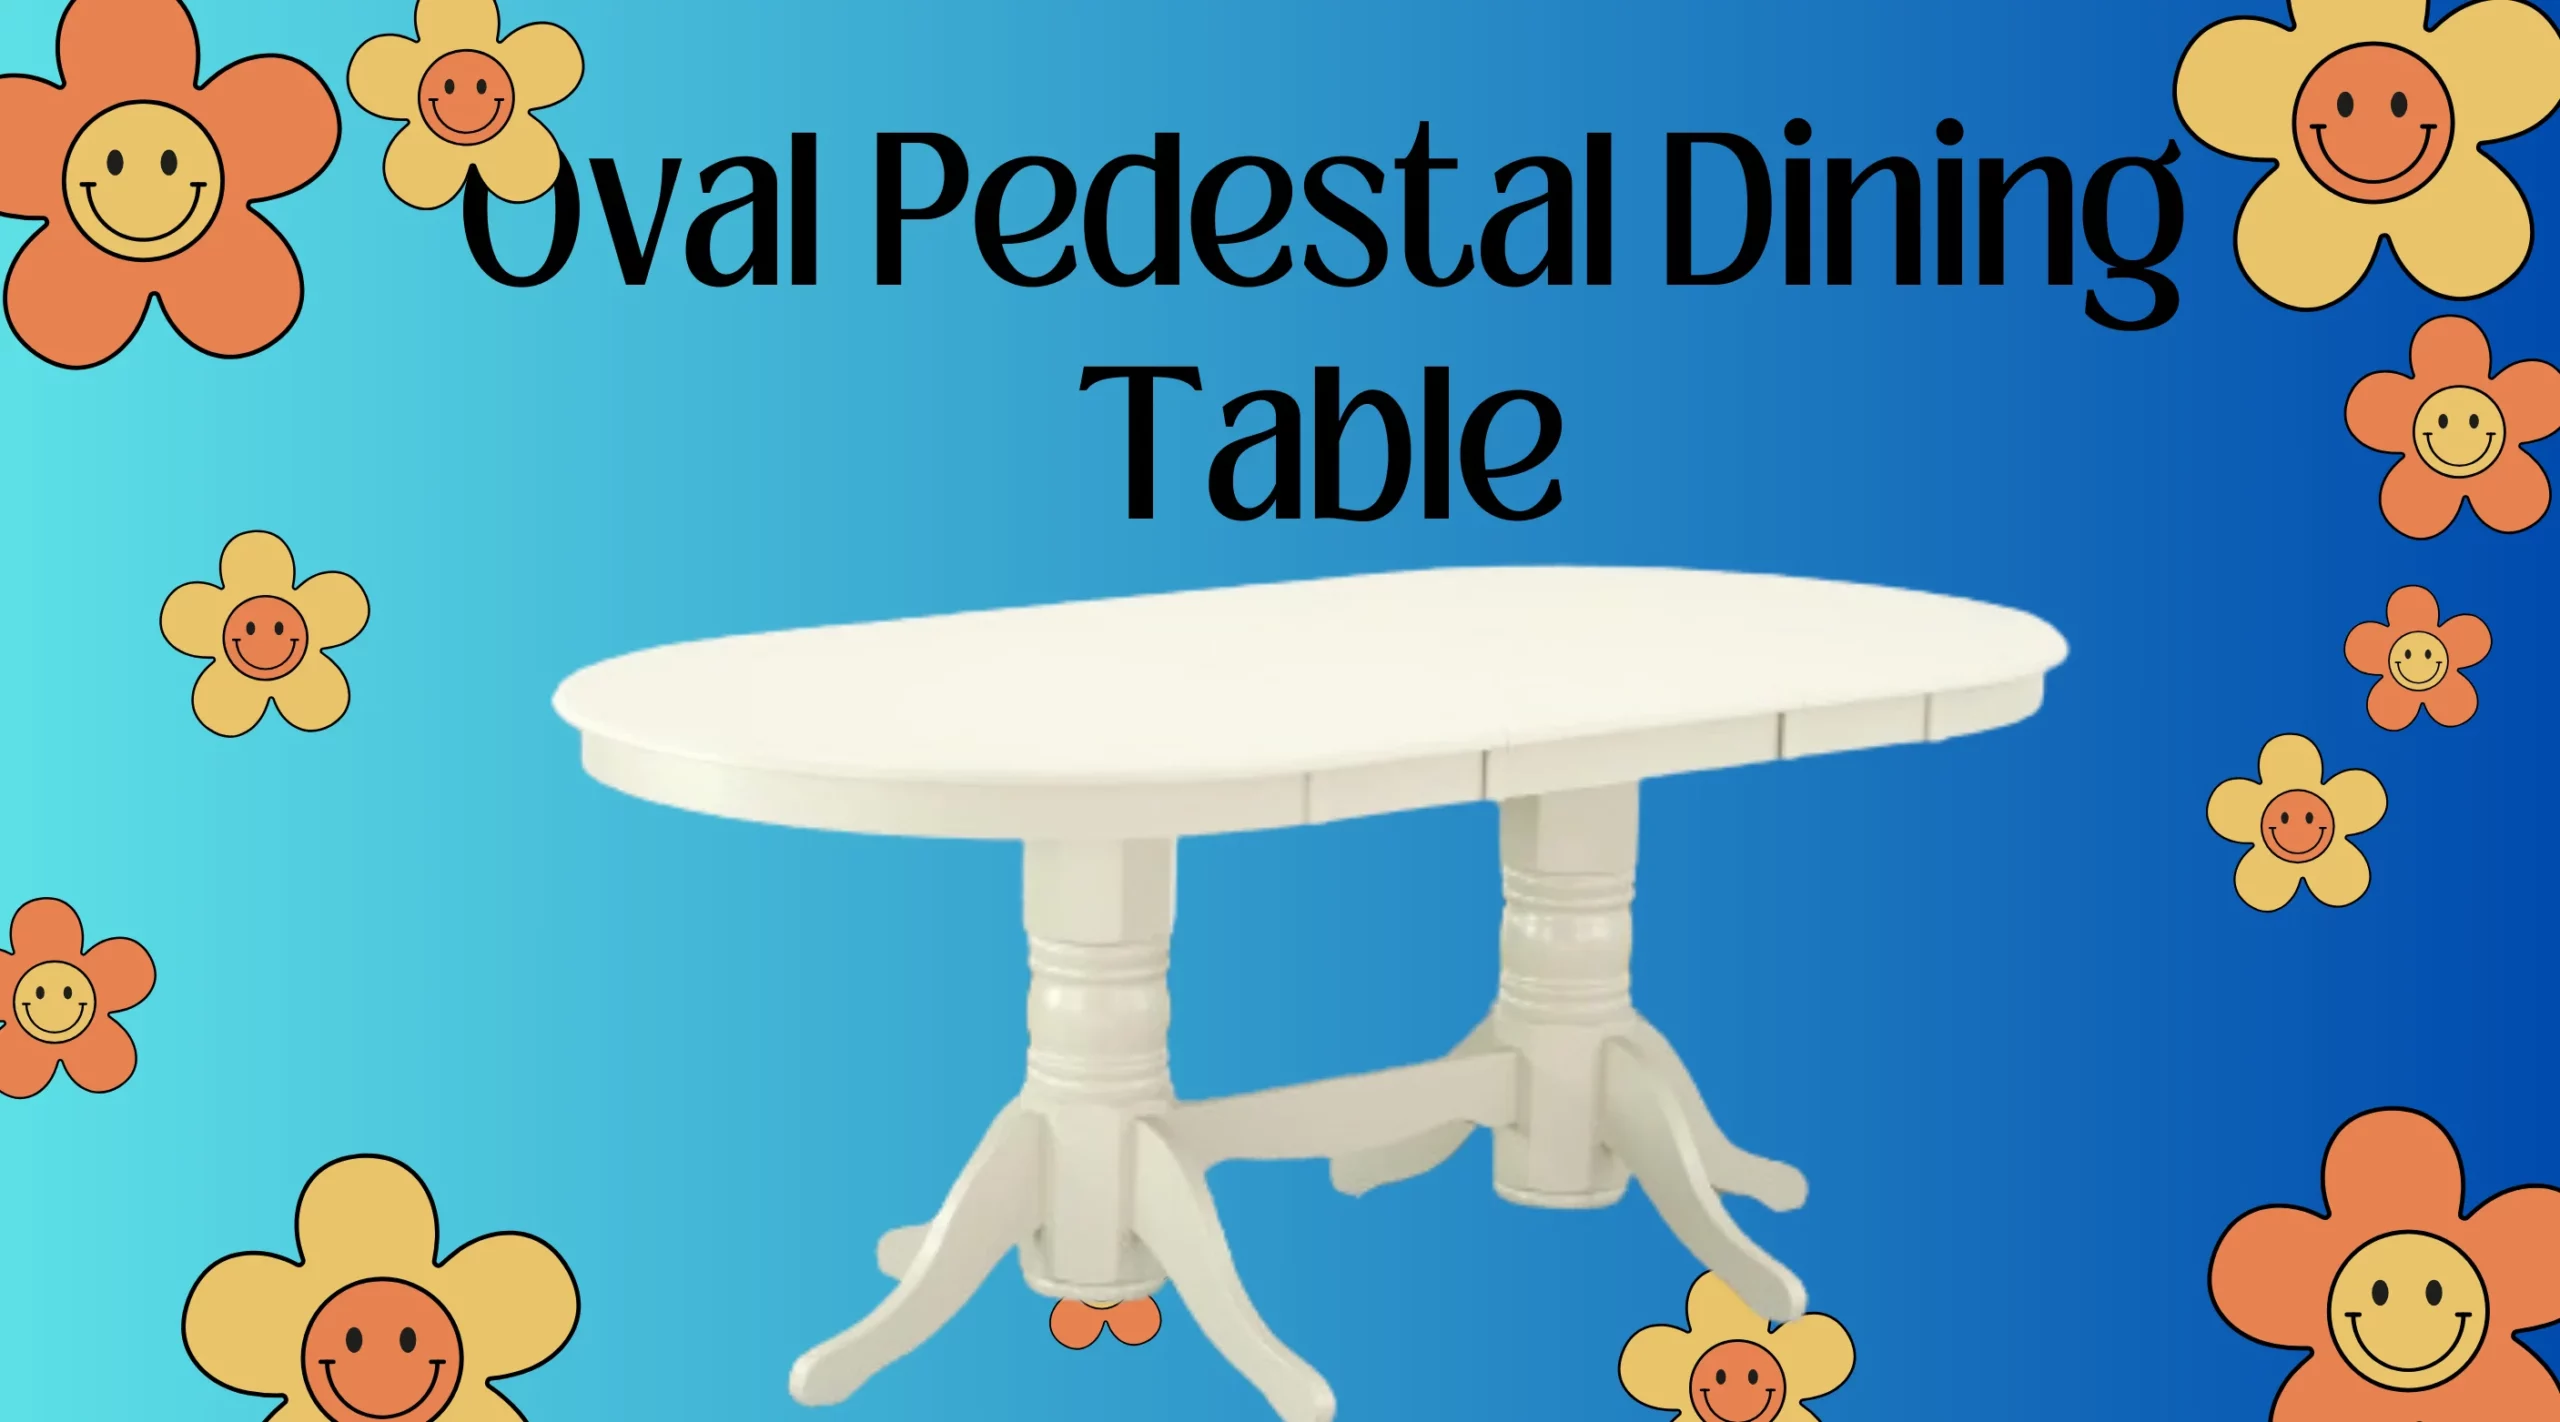 oval pedestal dining table